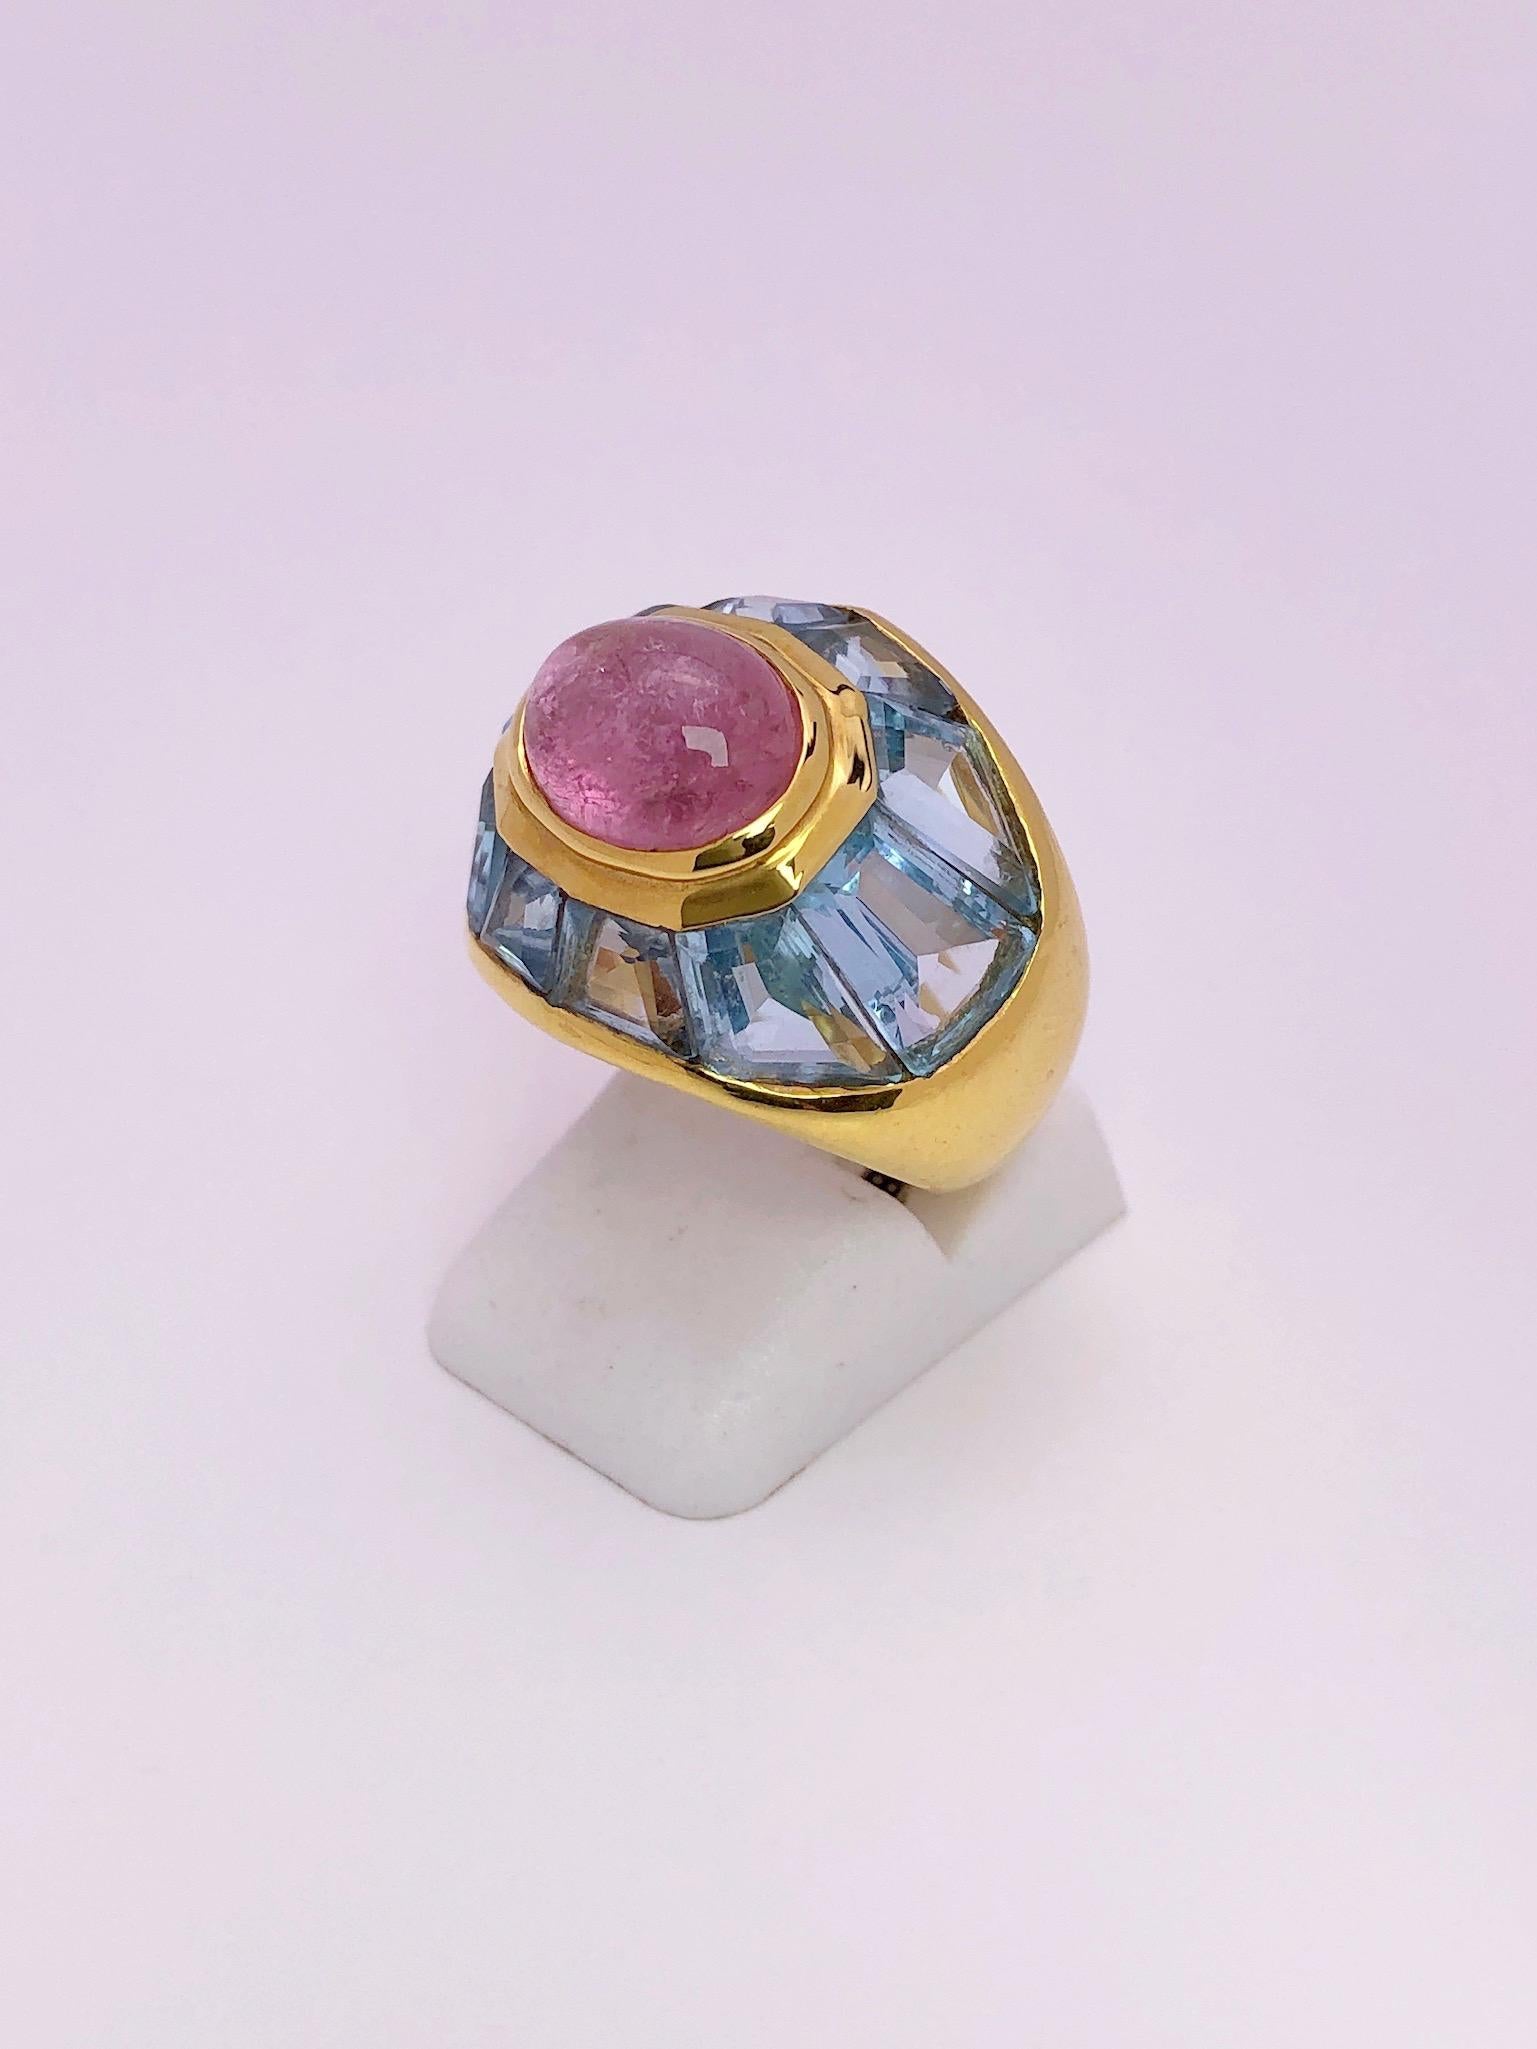 pink tourmaline and blue topaz ring